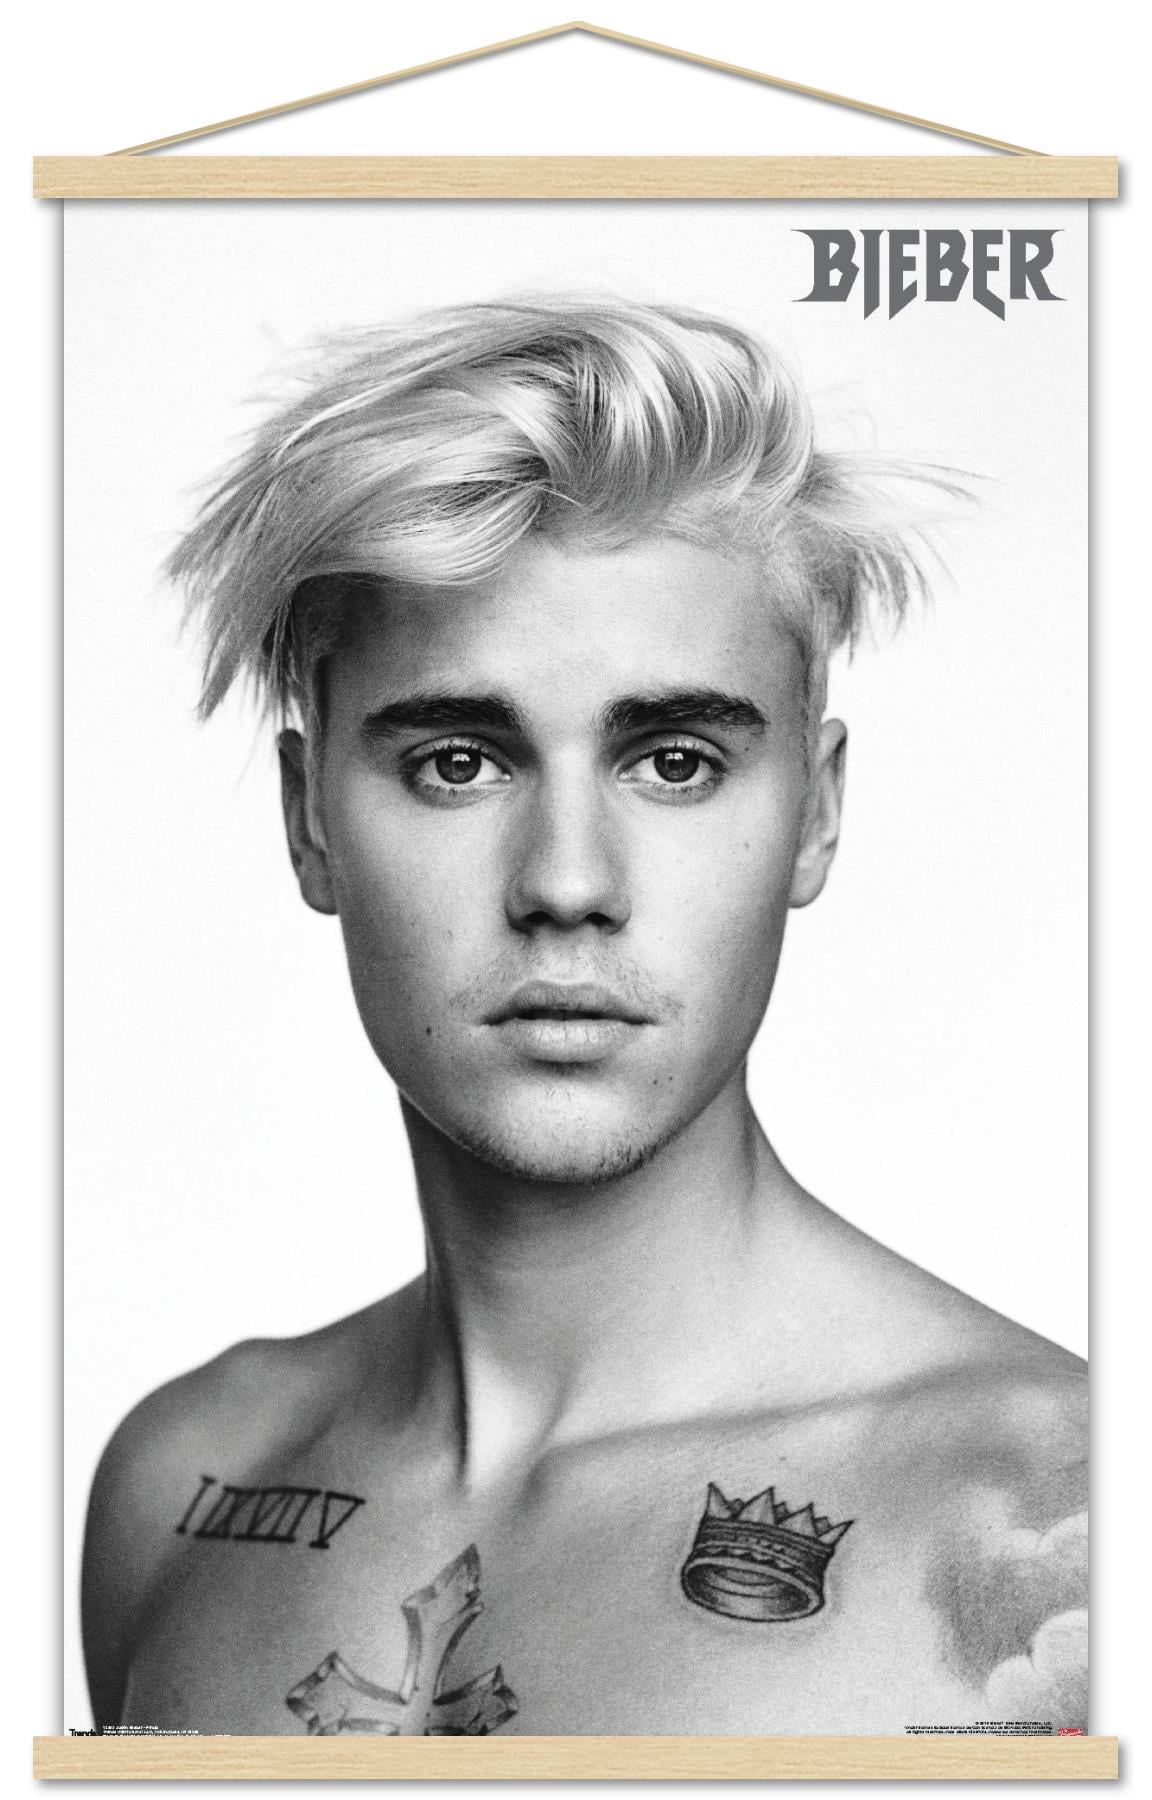 Art insane - Justin bieber Size A3 material Color Pencil sketch Make by :  Mohd Israr This page dedicated to the art lovers,this page deals with some  kind fabulous art works and